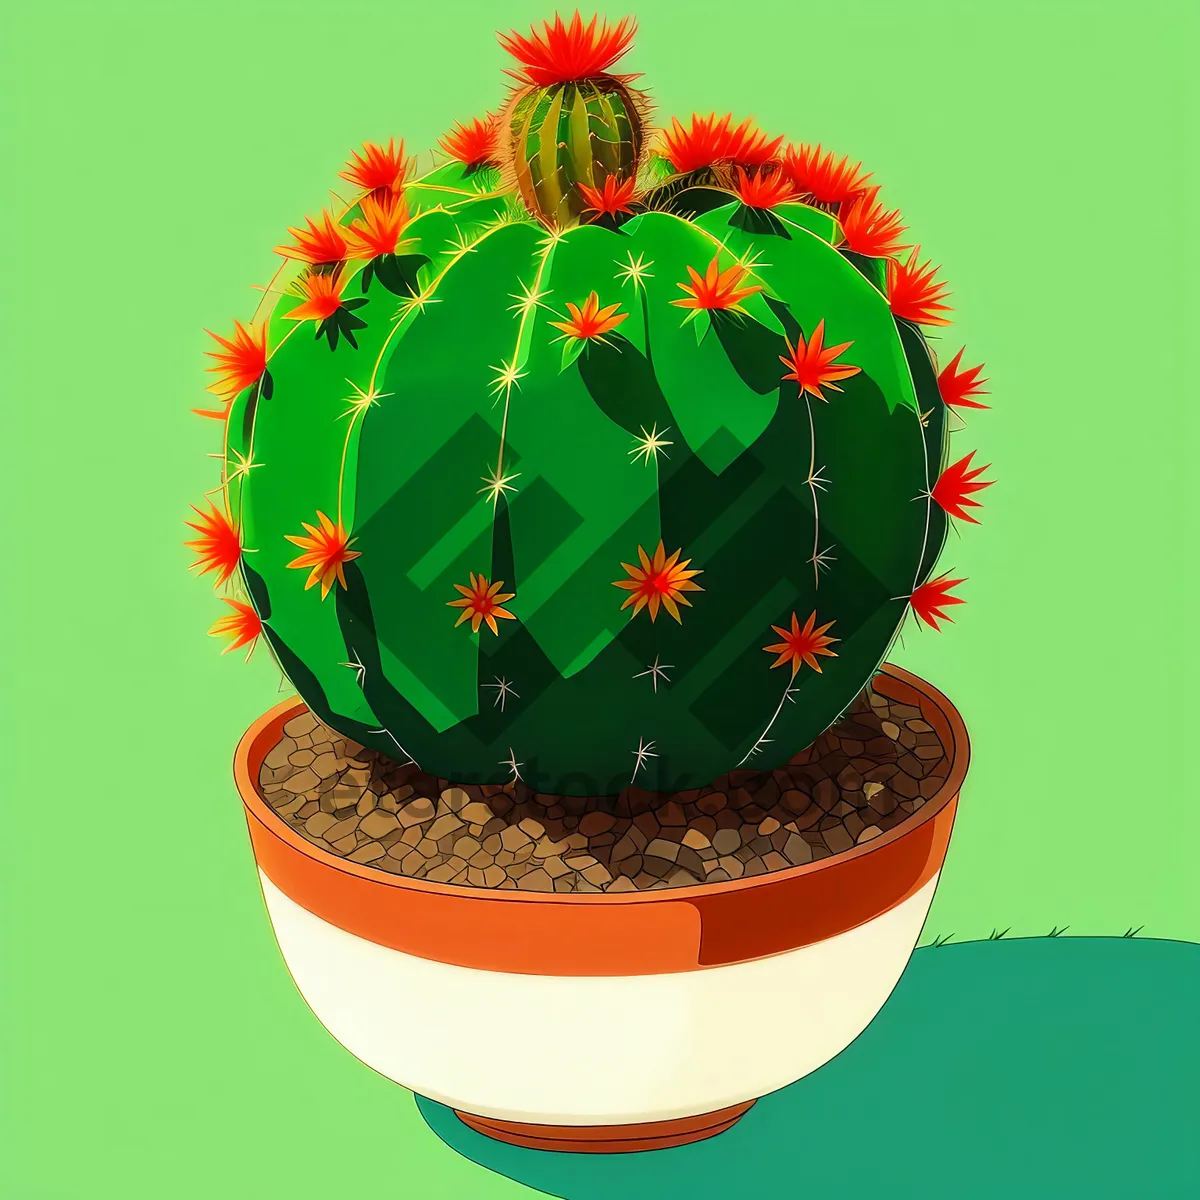 Picture of Festive Cactus Sphere with Shiny Ornaments